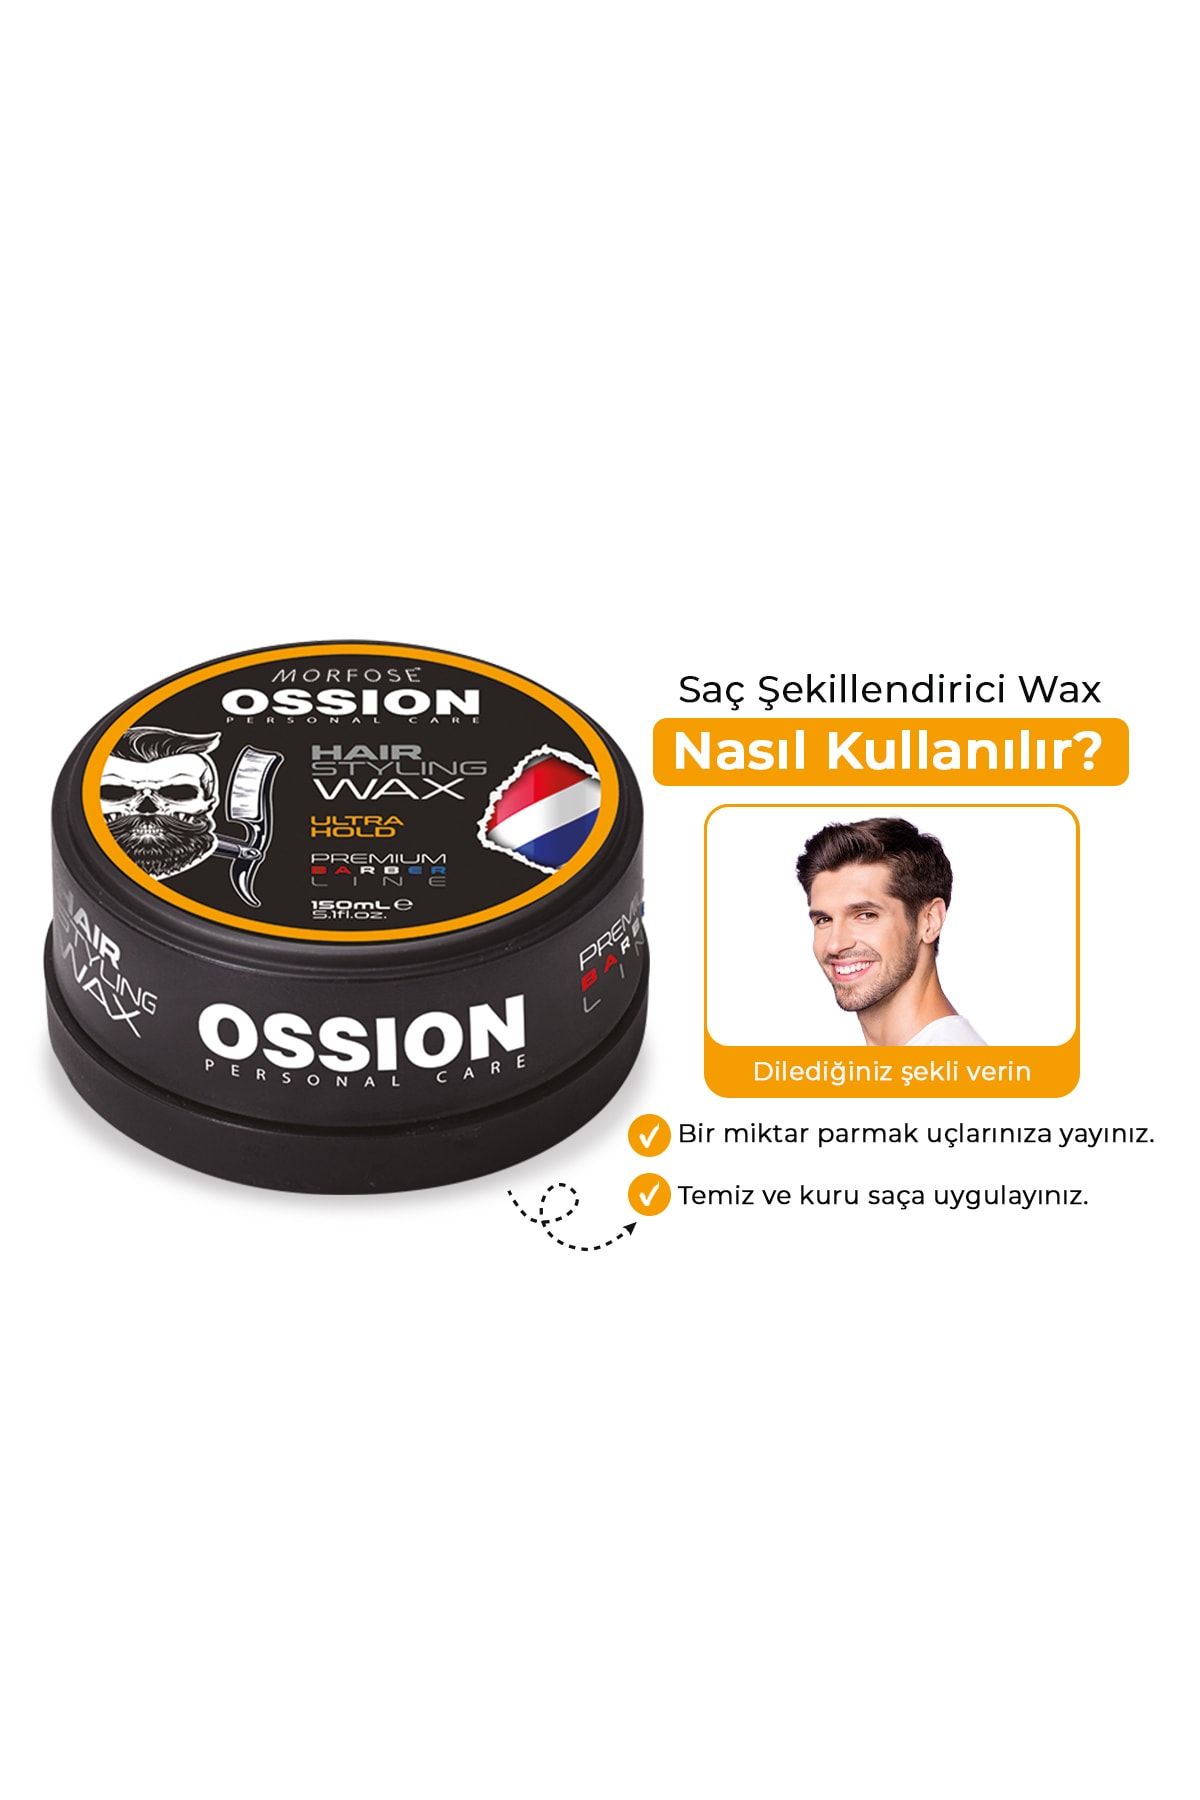 Ossion Premium Barber Wax Ultra Hold 150 ml 01.4.11772